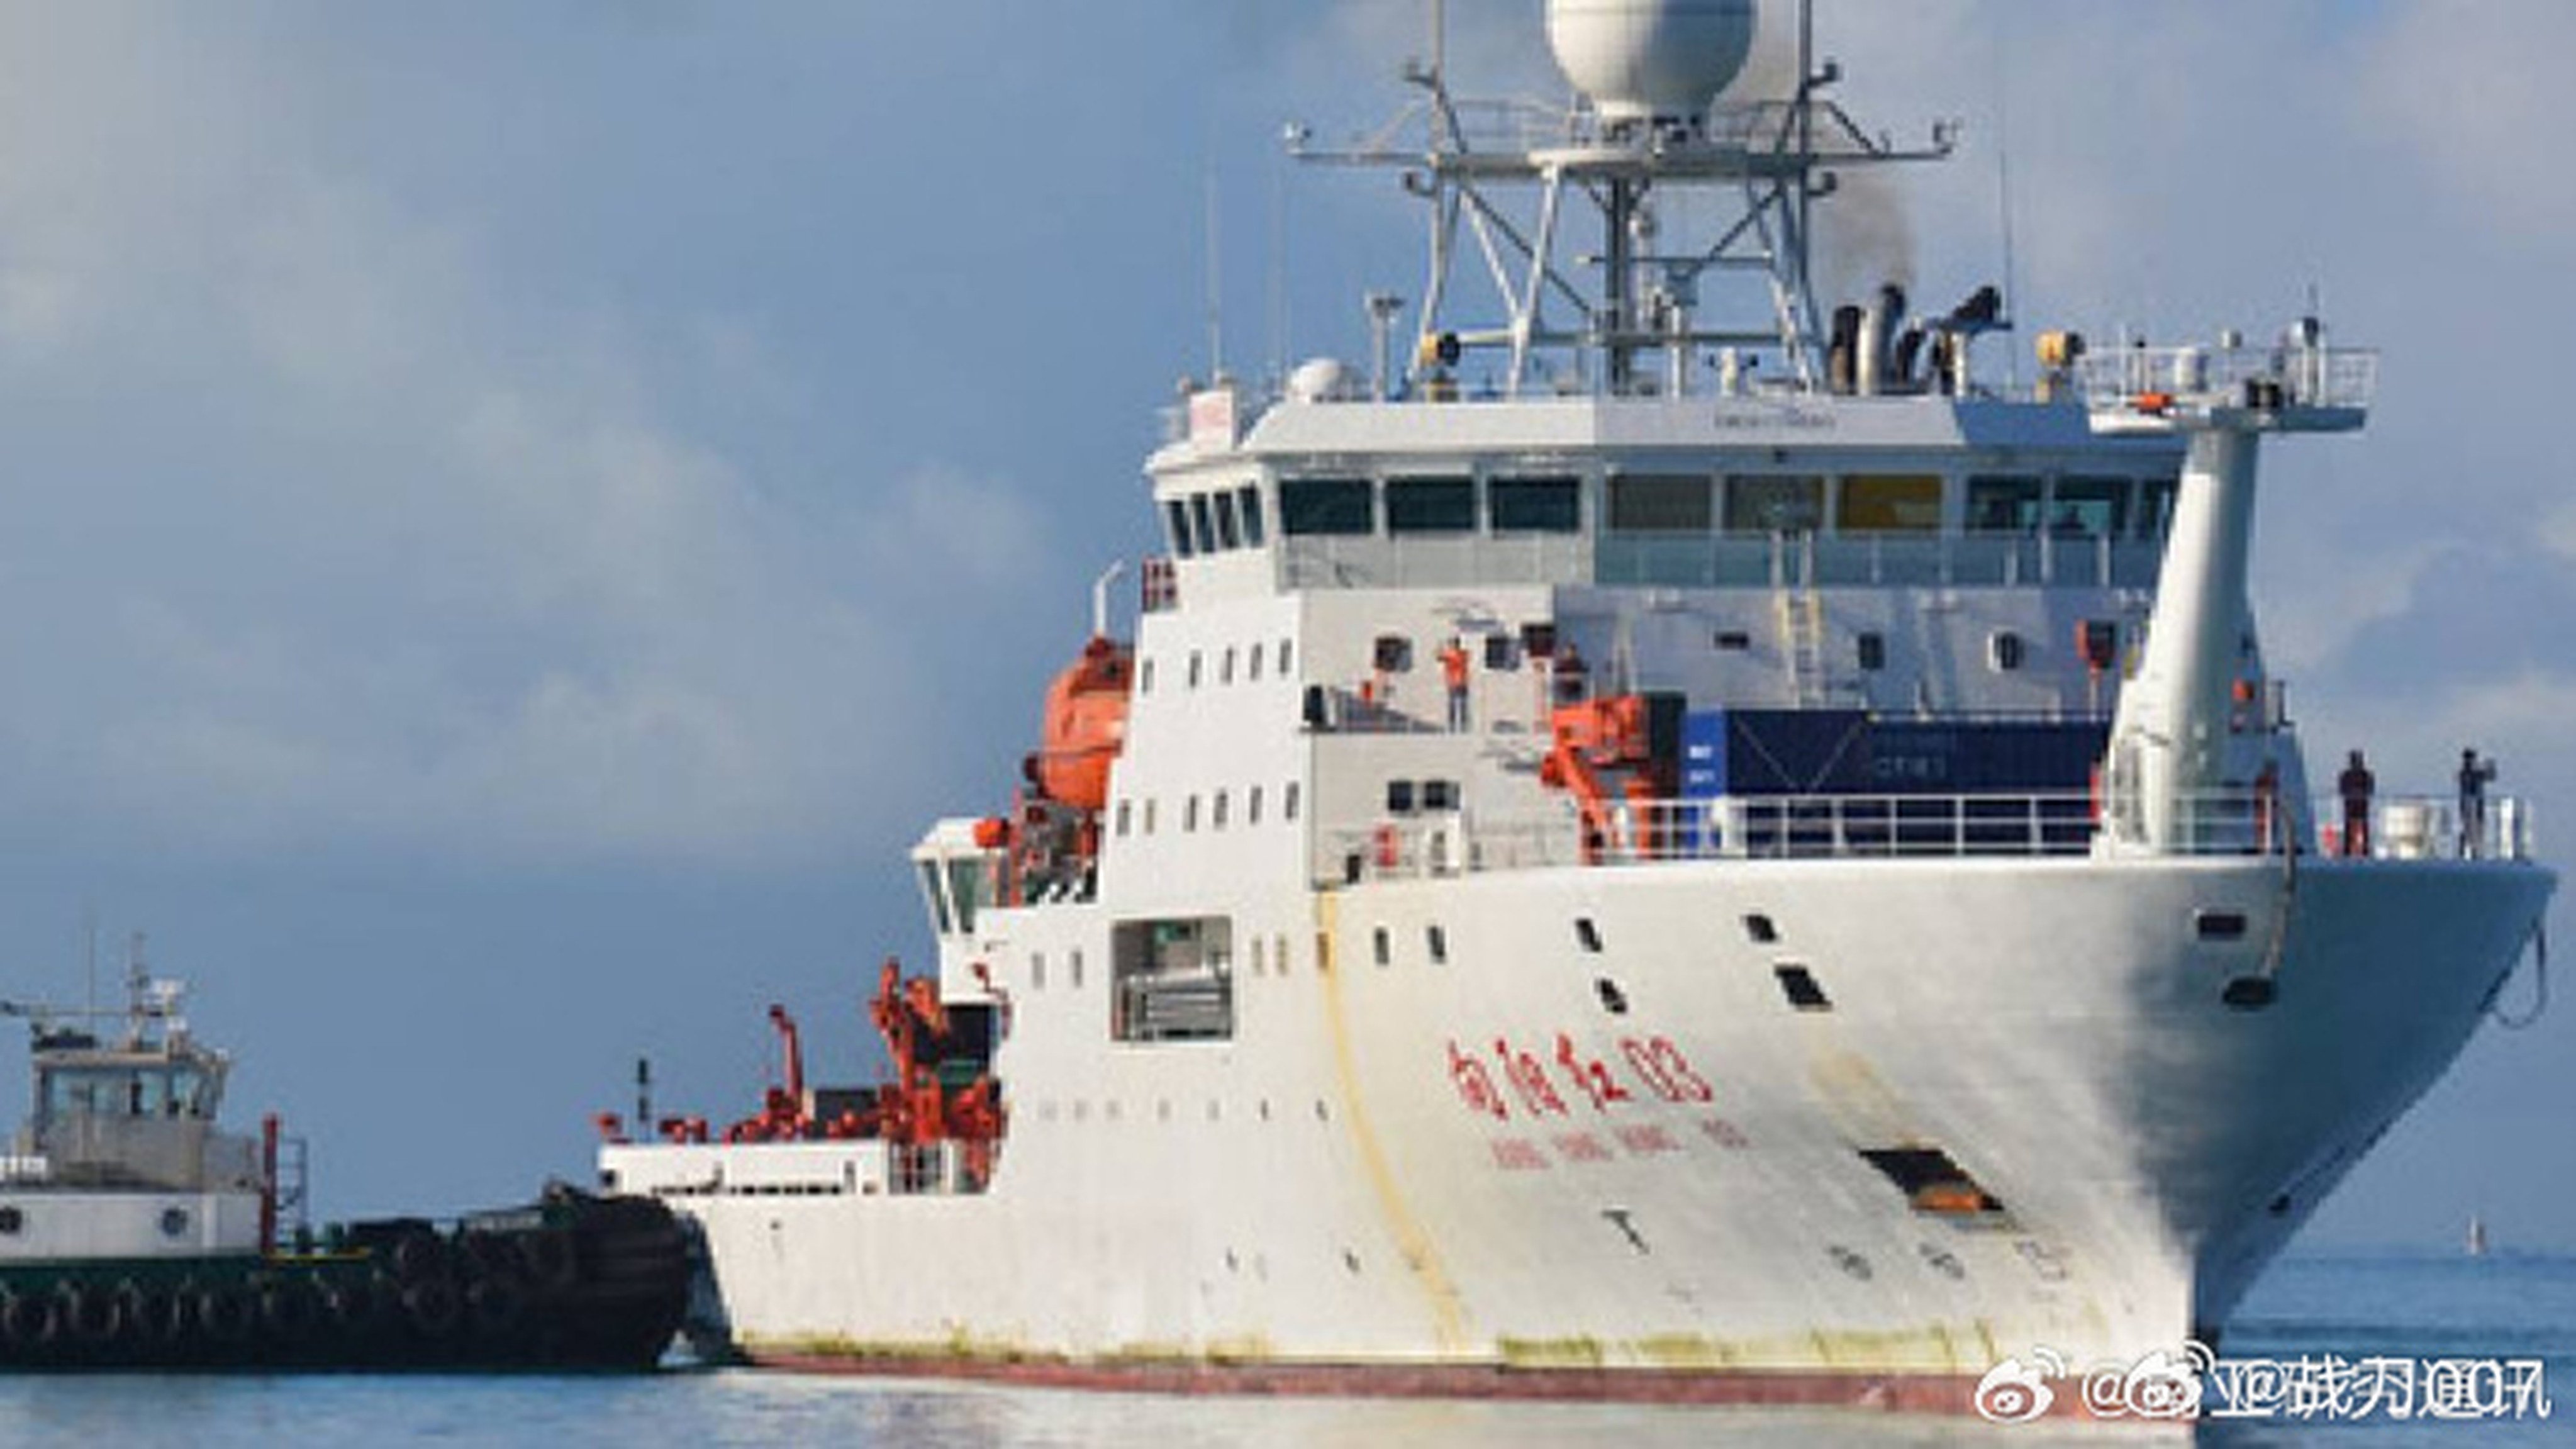 The Chinese research vessel Xiang Yang Hong 3 is due to dock in the Maldives on February 5. The visit comes as India and China jostle for influence in the region. Photo: Weibo